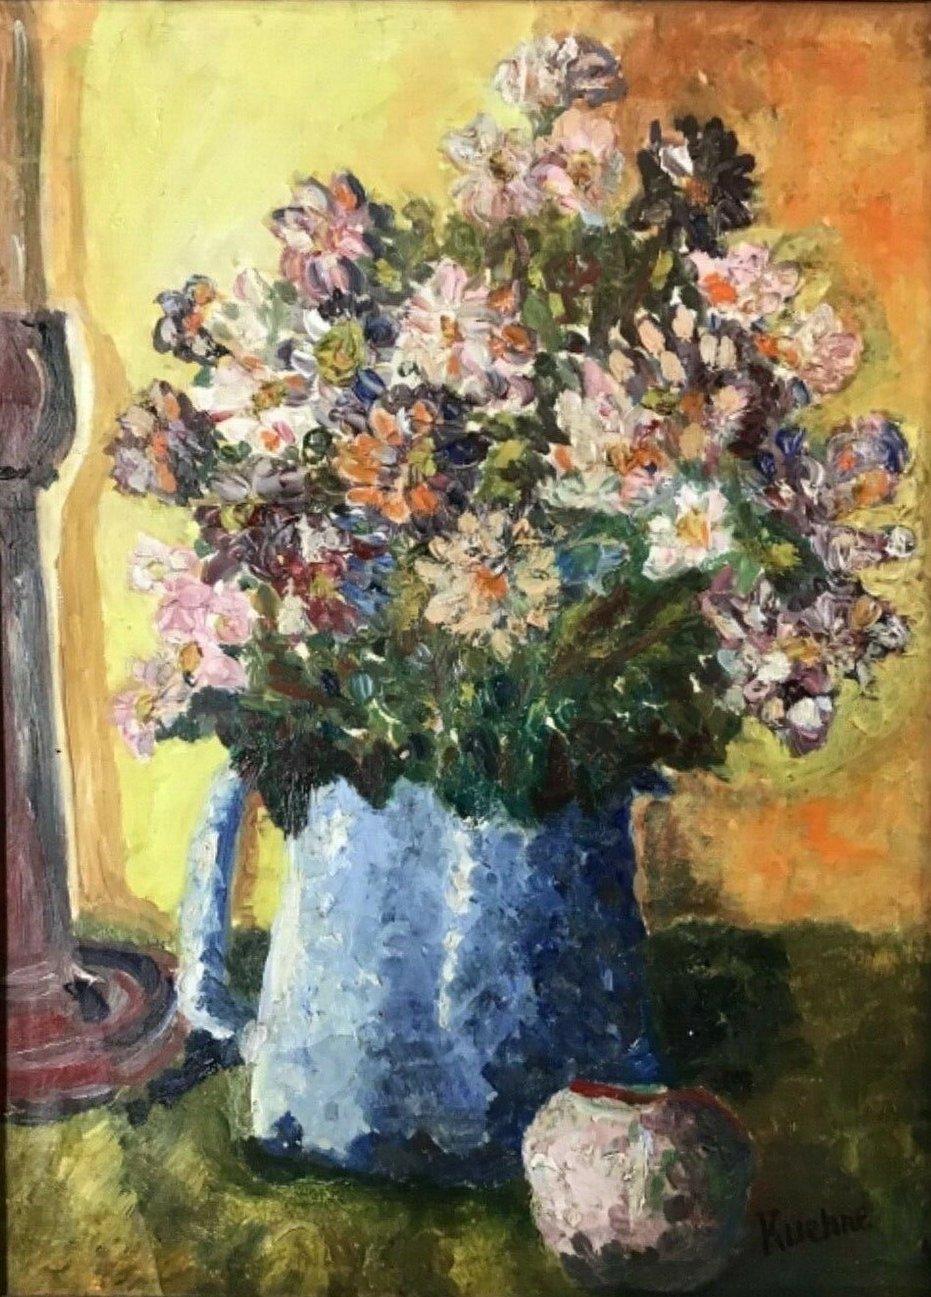 Max Kuehne Interior Painting - "Floral Still Life in a Blue Vase" American Impressionist